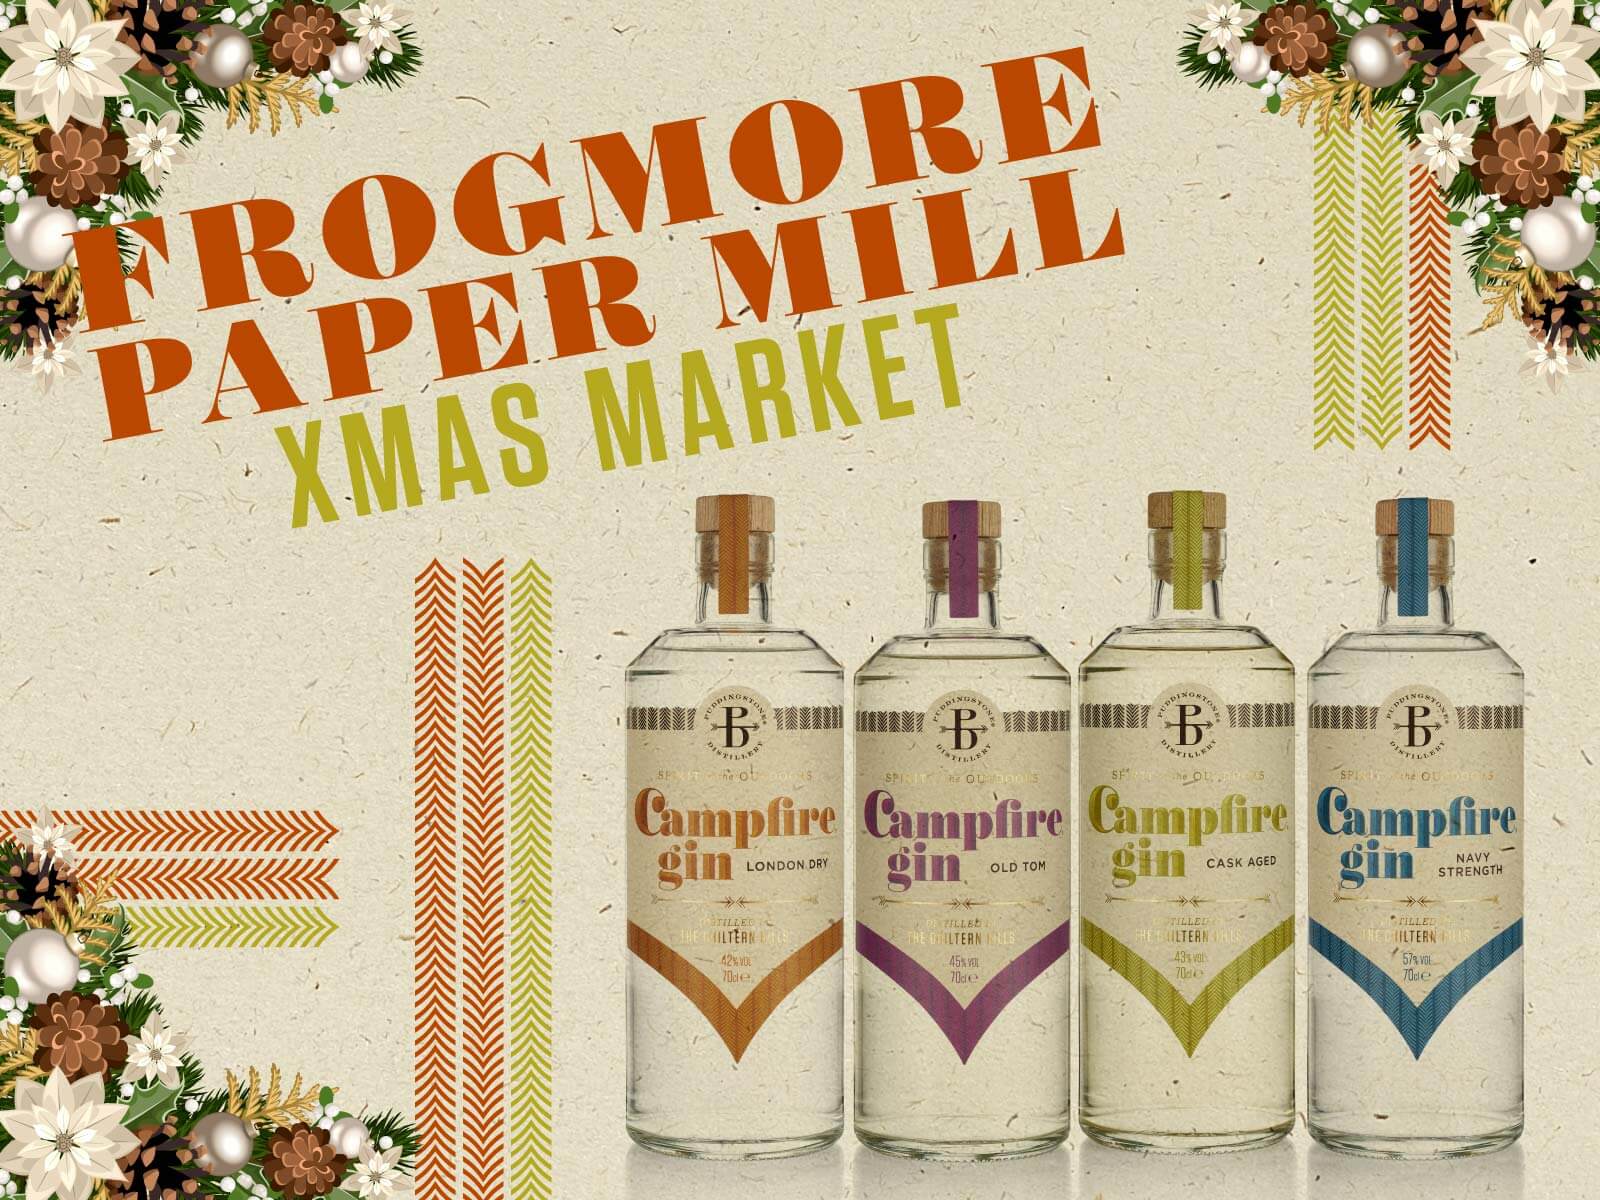 Frogmore Paper Mill Christmas Market